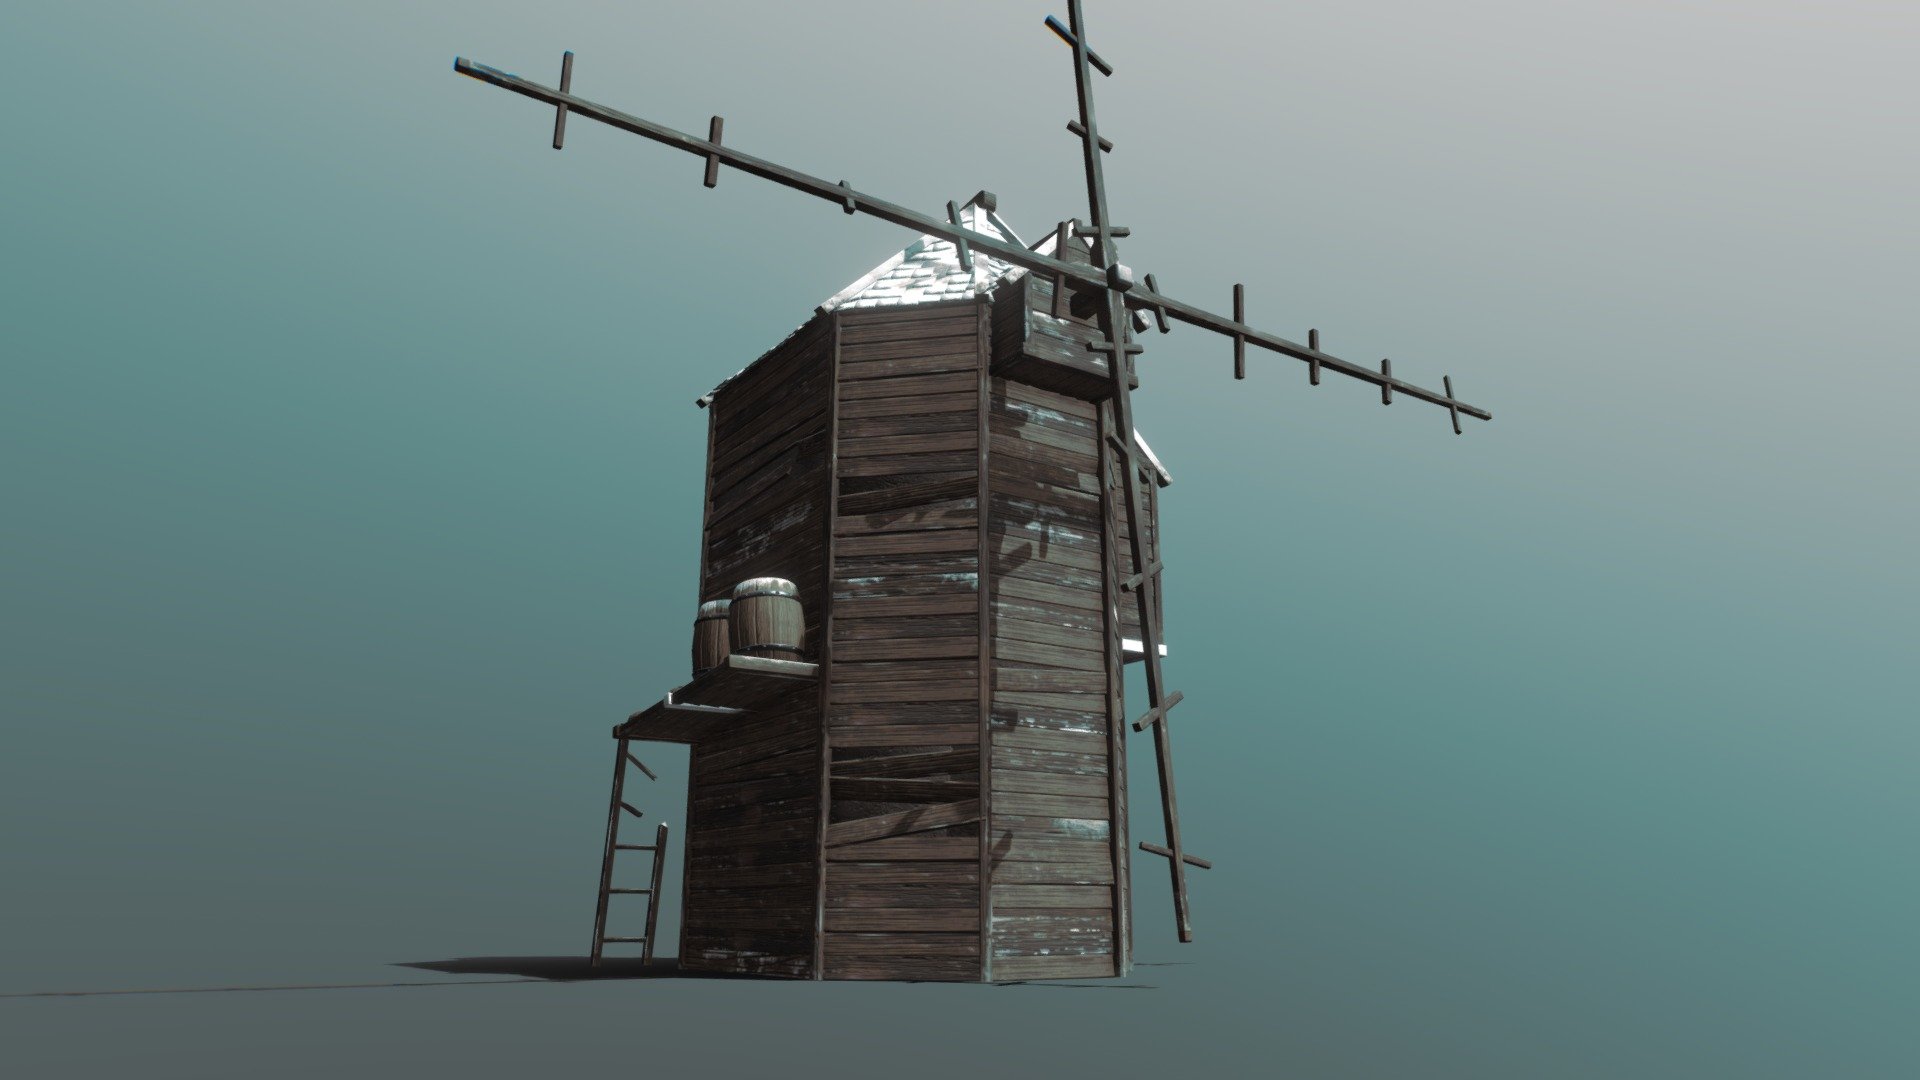 A windmill  made in maya, sculpted in zbrush, textured in substance. this is part of a modular set that i made for a game demo 3d model